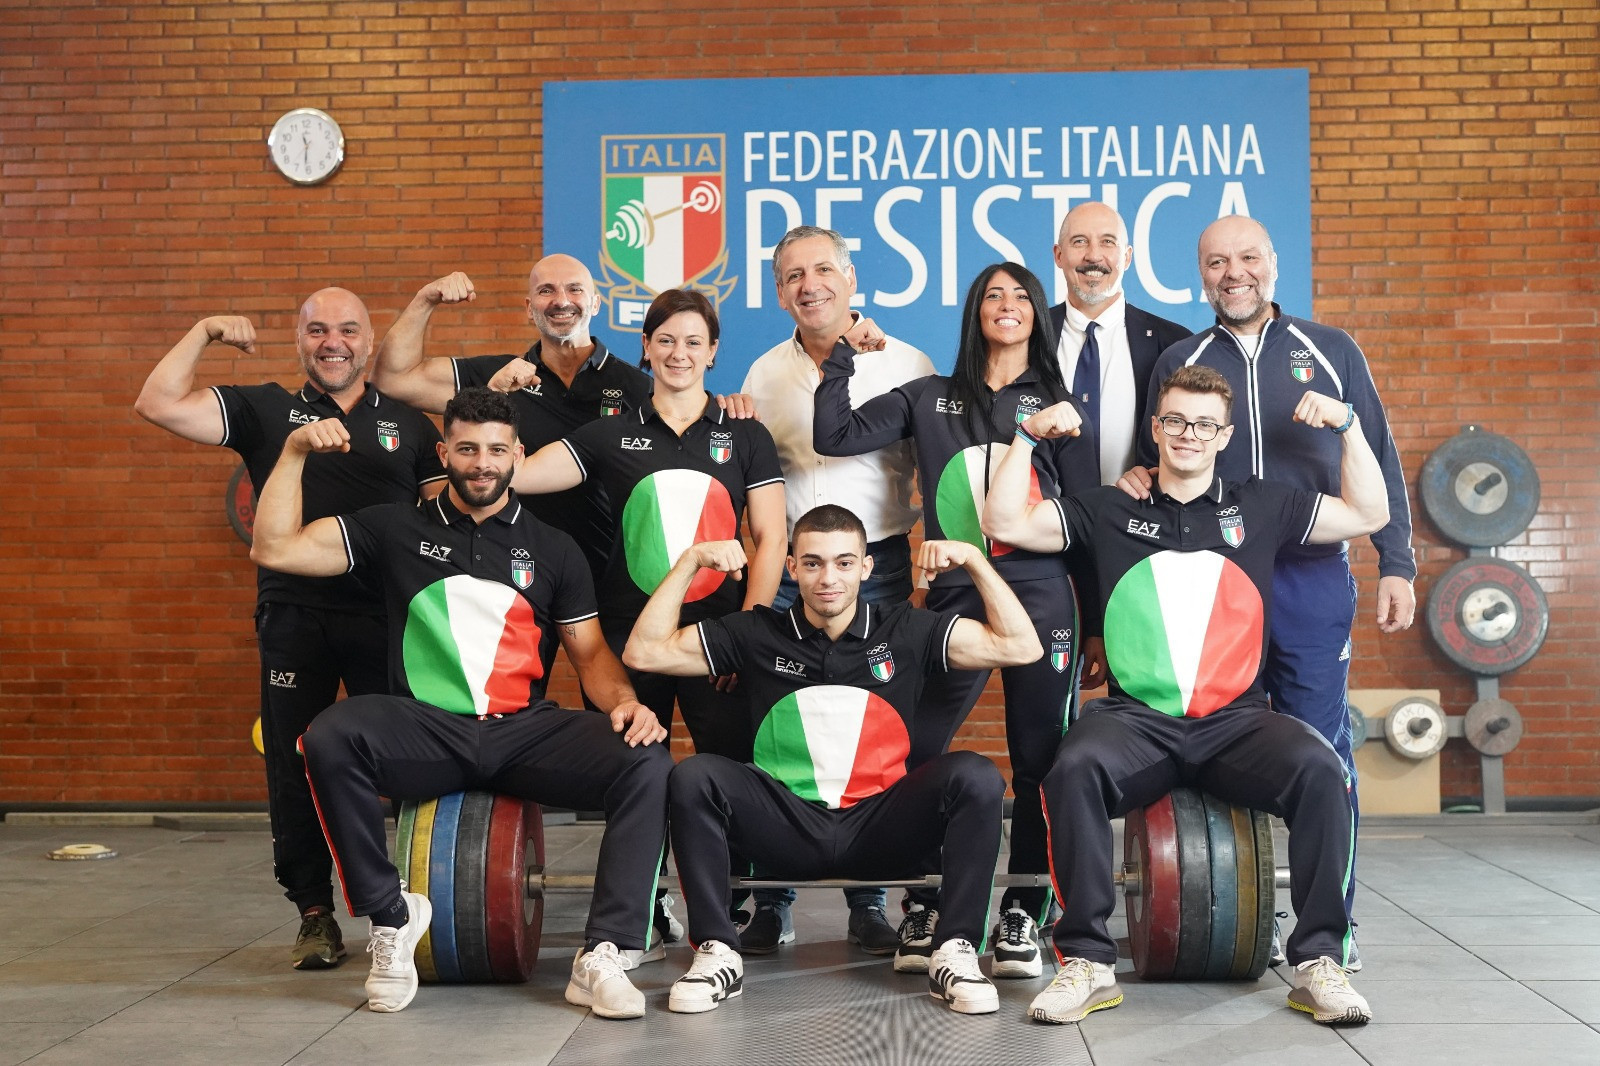 Weightlifting reformer Urso earns highest honour from Italian National Olympic Committee 